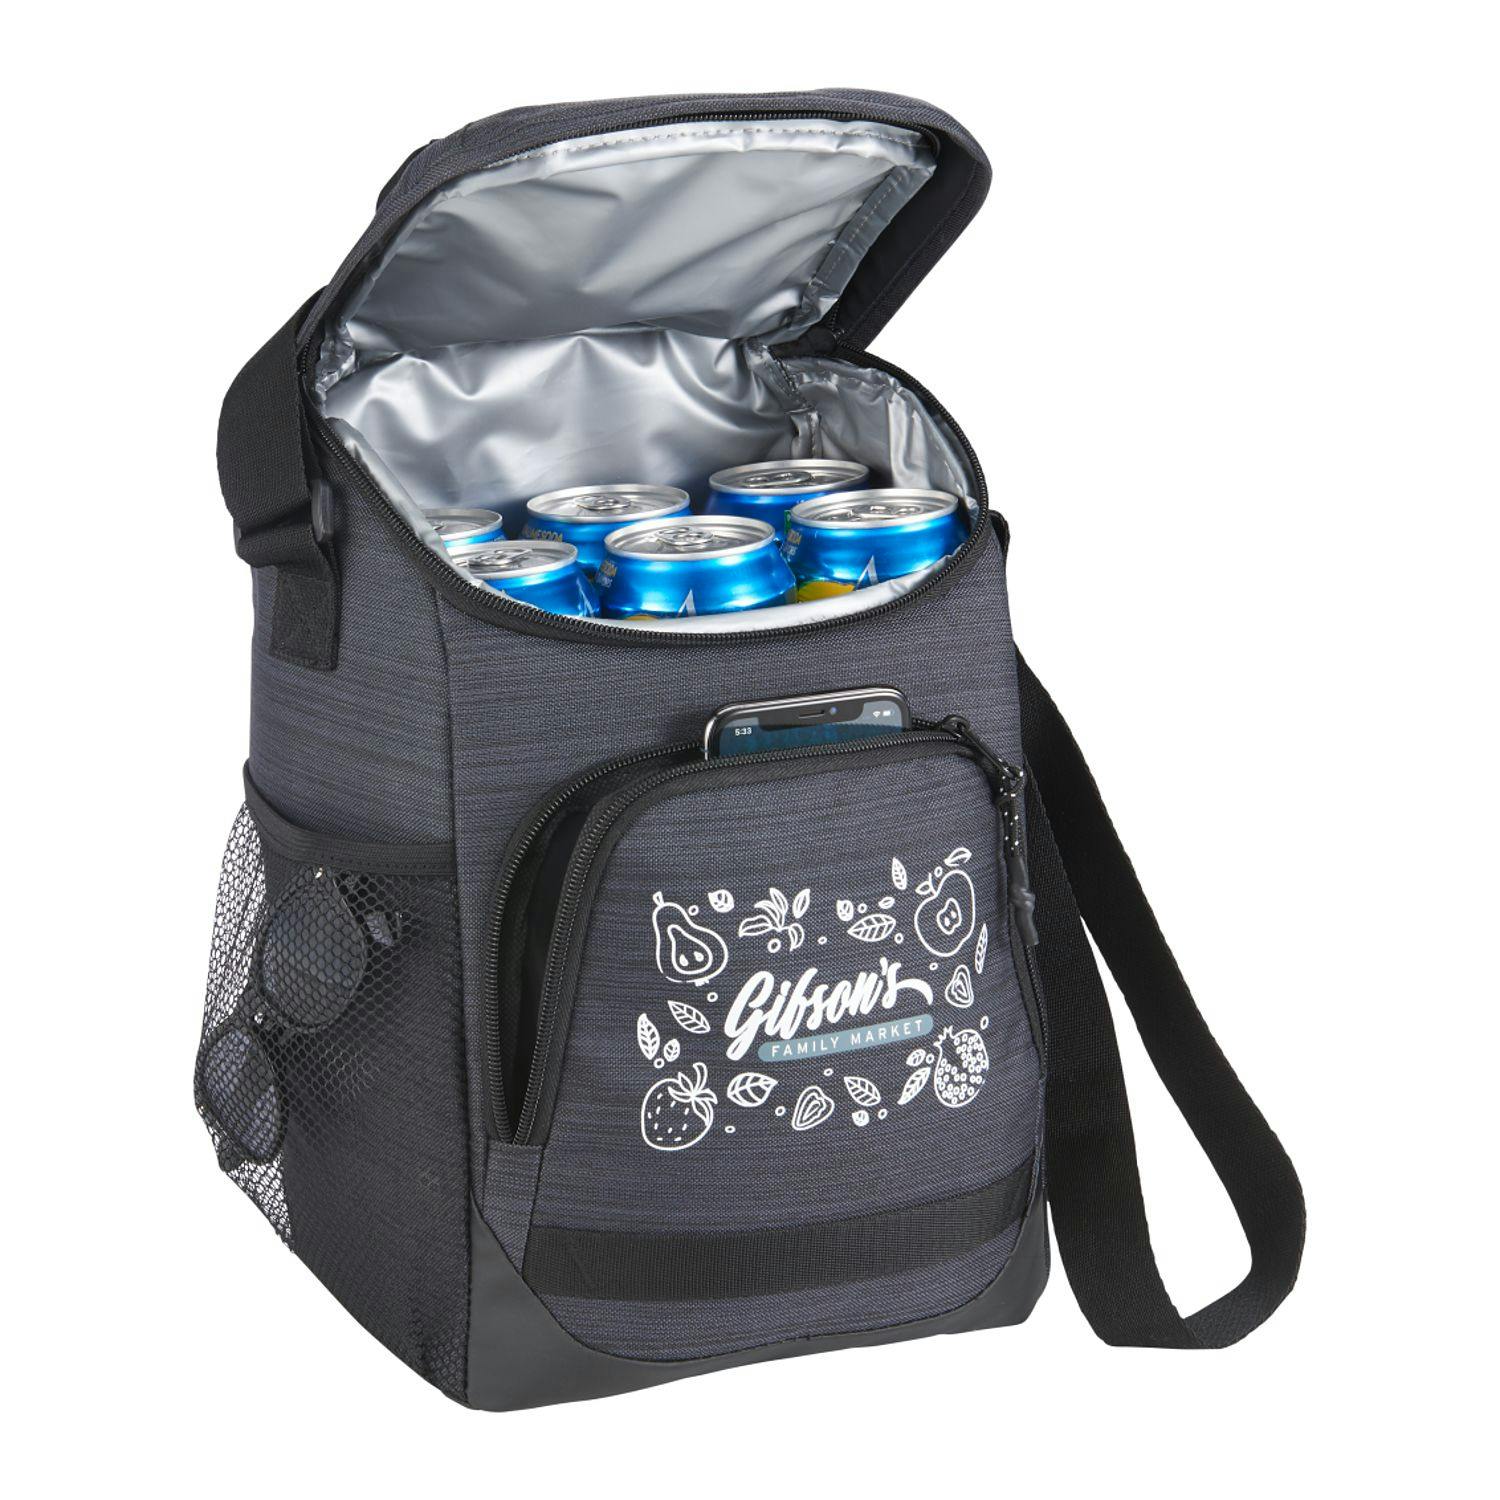 NBN Mayfair 12 Can Cooler - additional Image 2